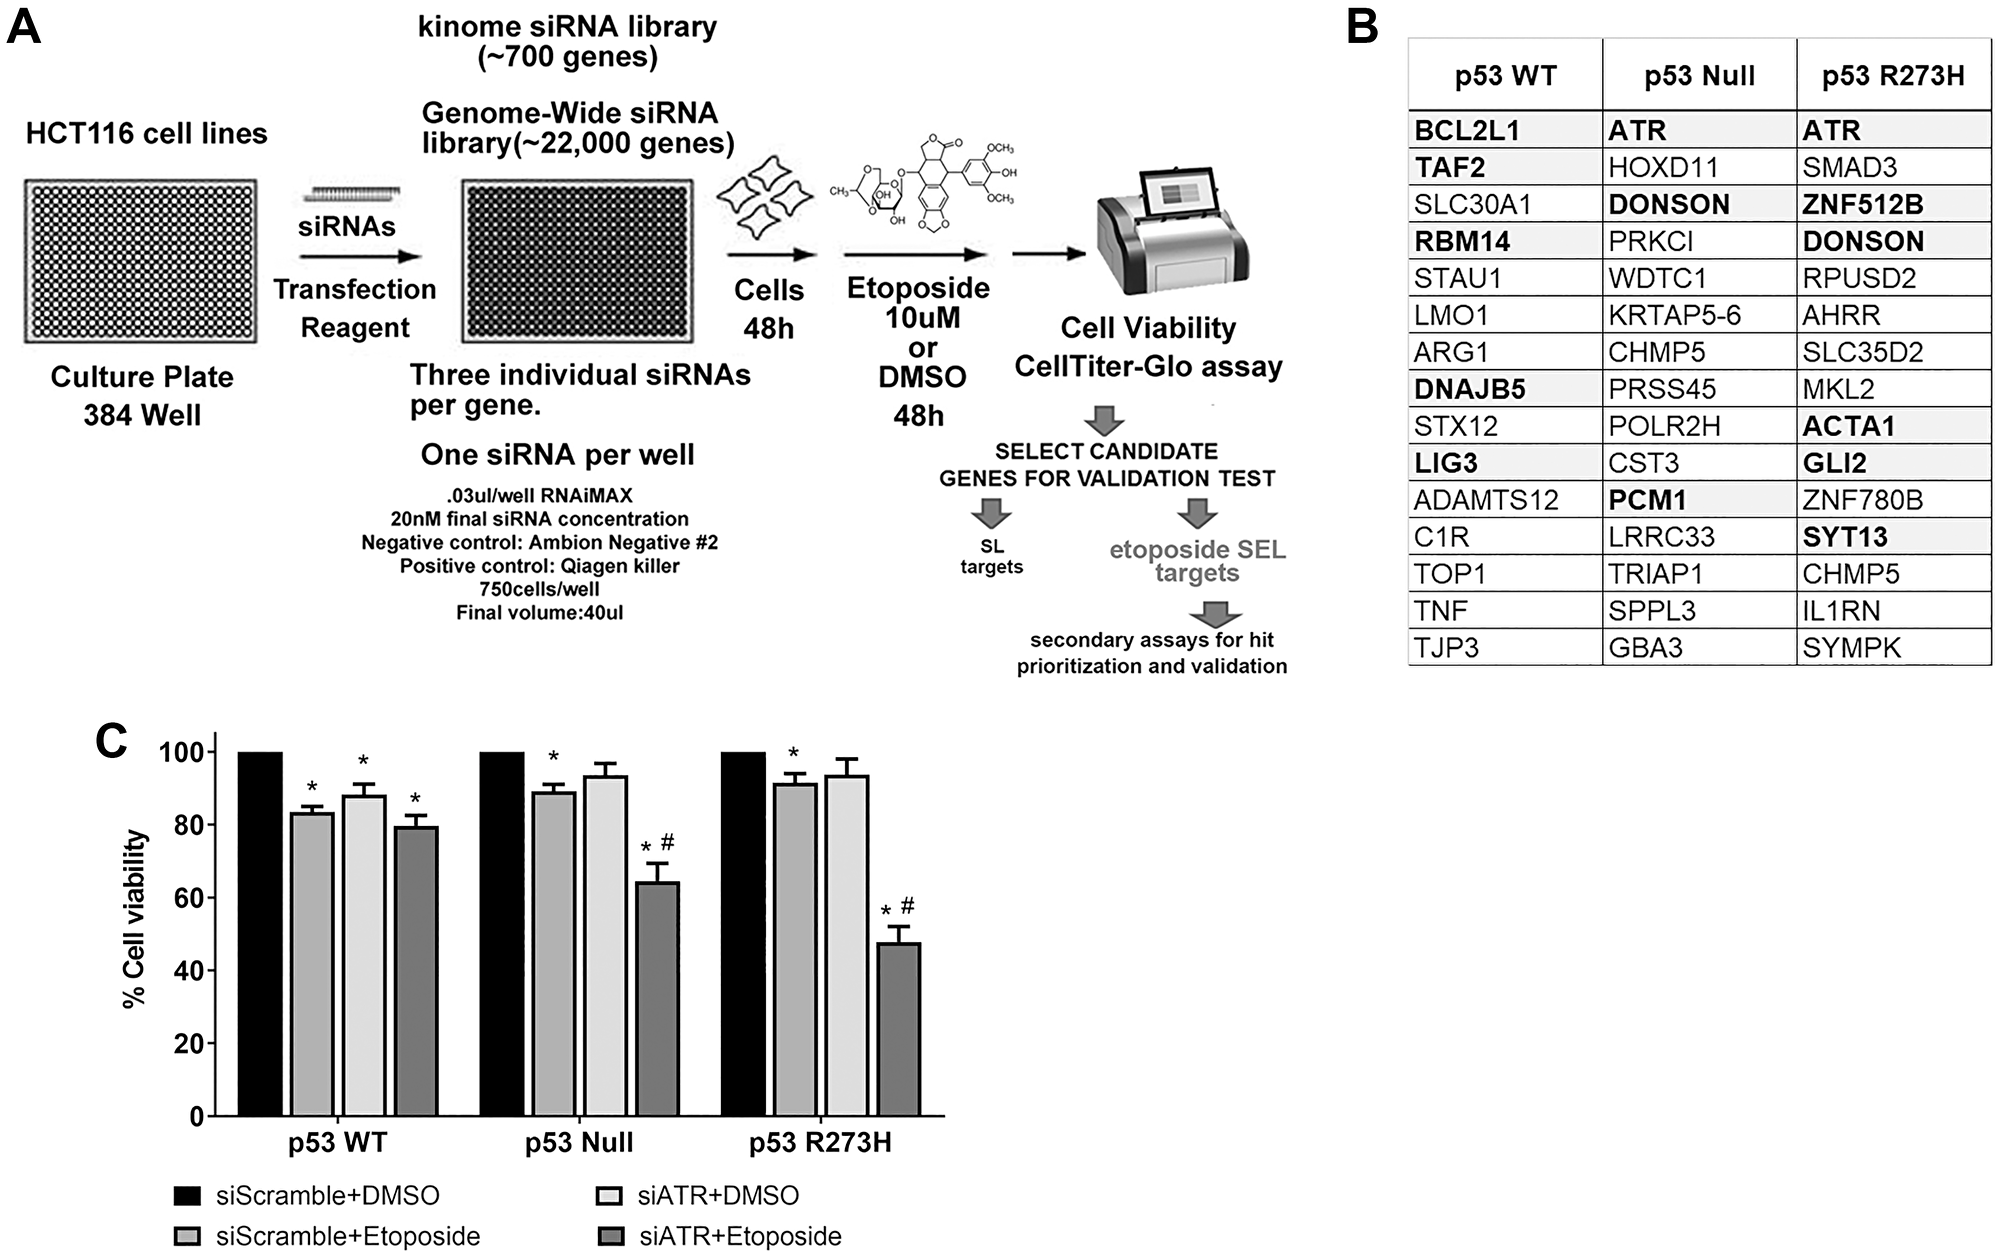 Identification of ATR as an etoposide SEL target in p53 nonfunctional cellular background.